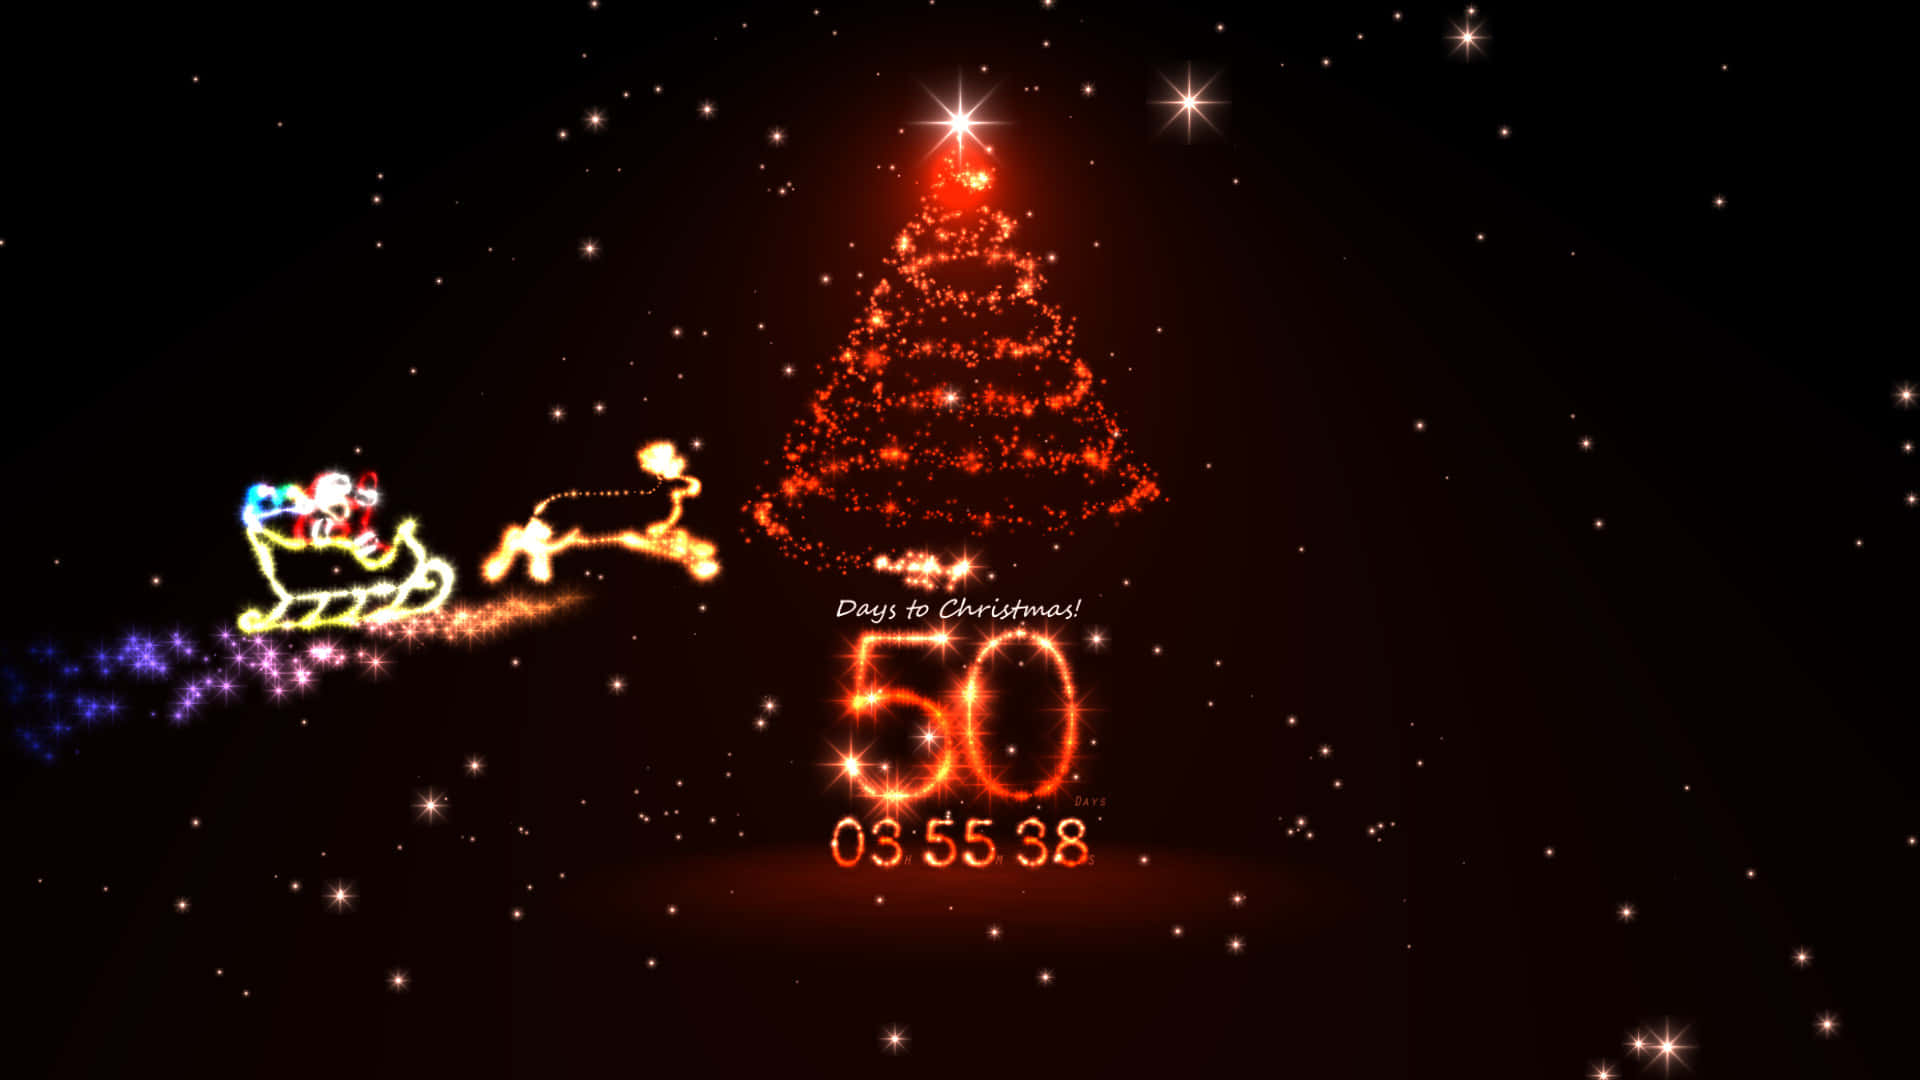 Ready for a snow filled Christmas? Just 9 days left till the magical day arrives! Wallpaper